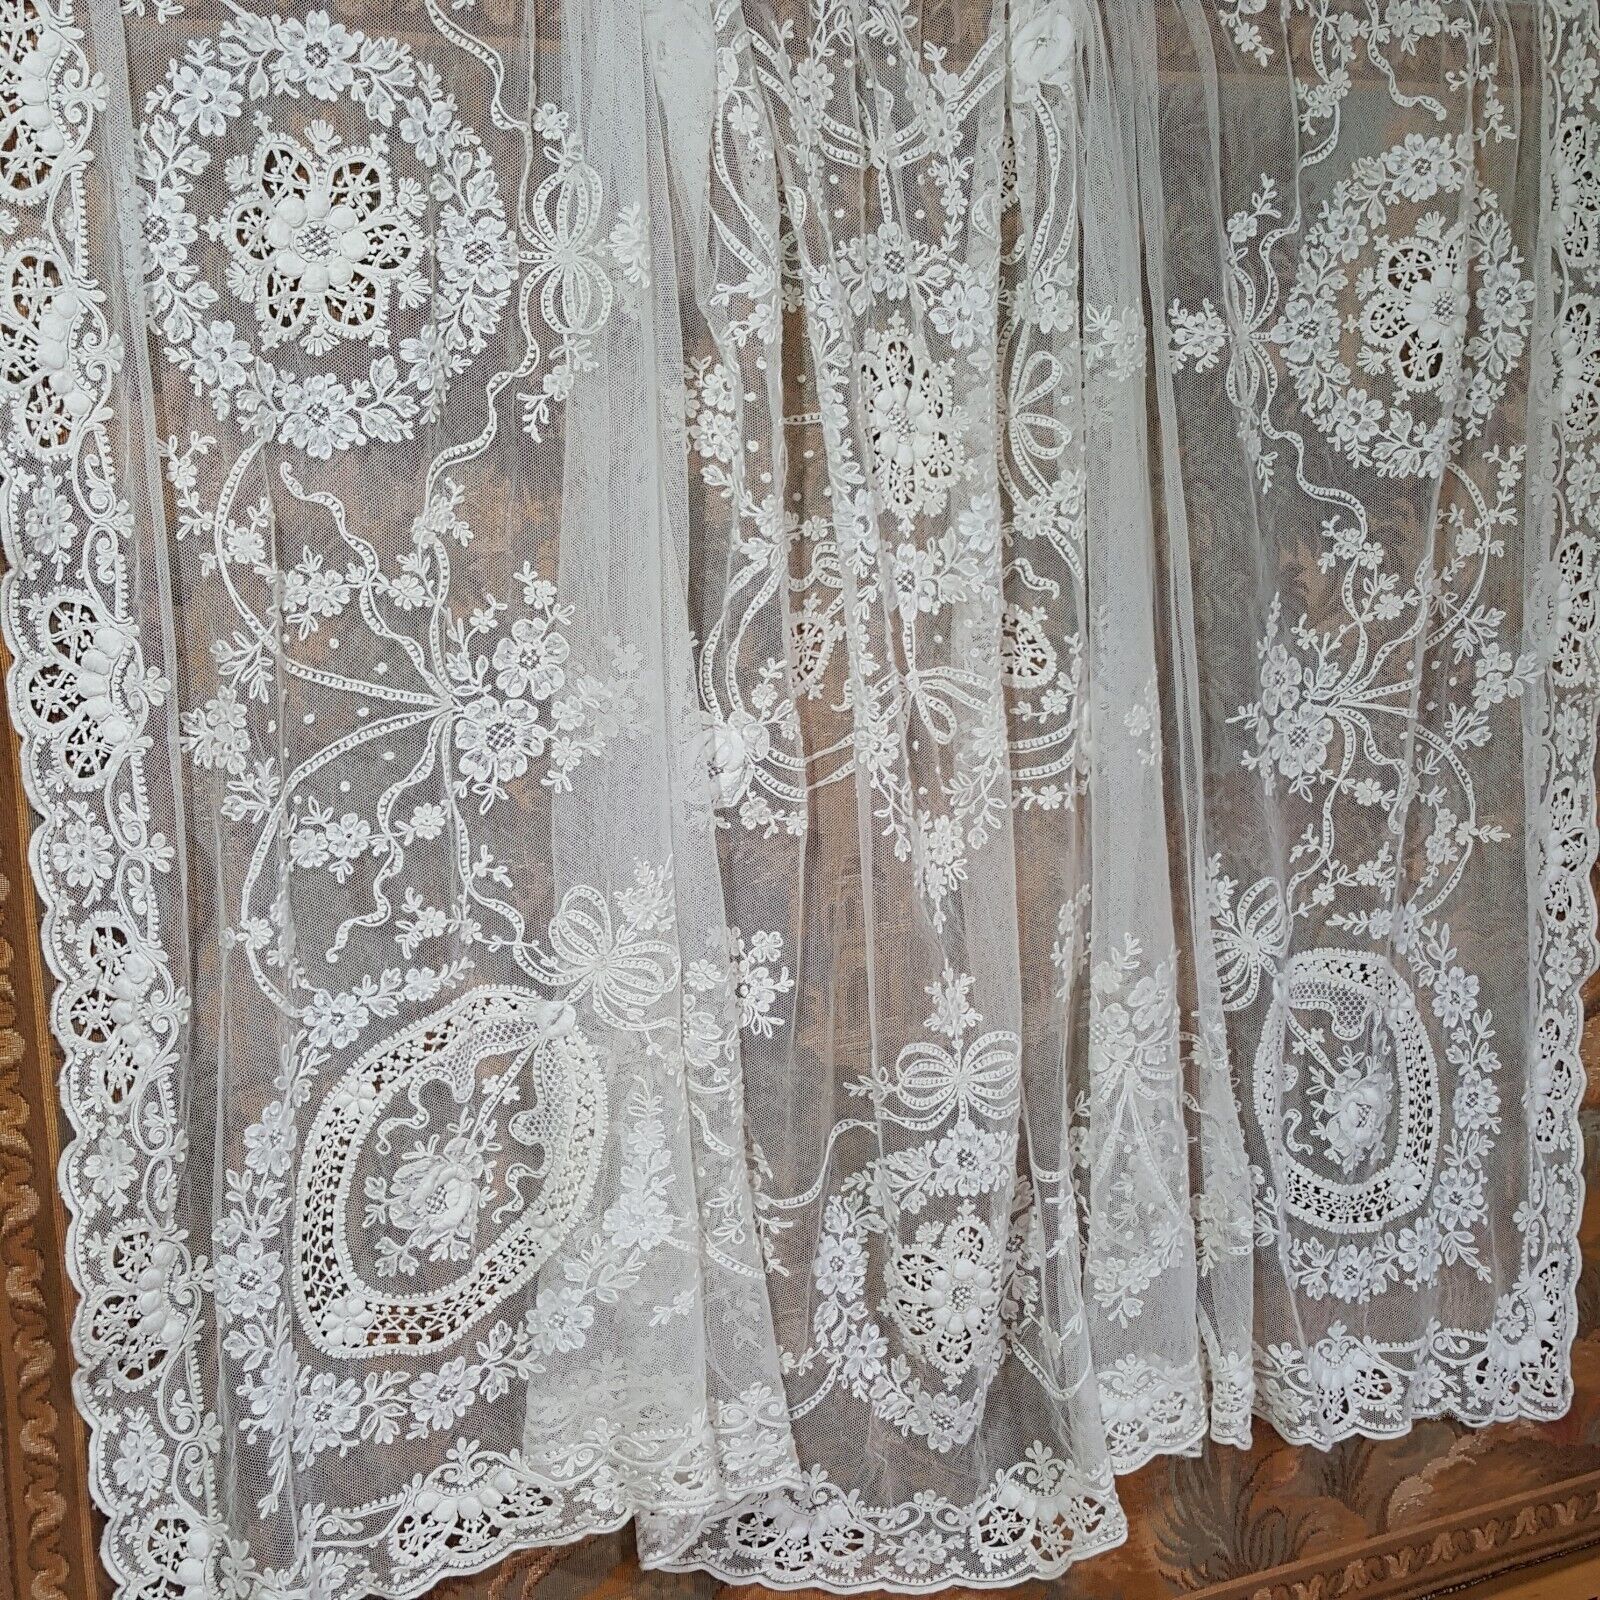 Large Antique Vintage Embroidered Embroidery Lace Tablecloth Cloth Cover